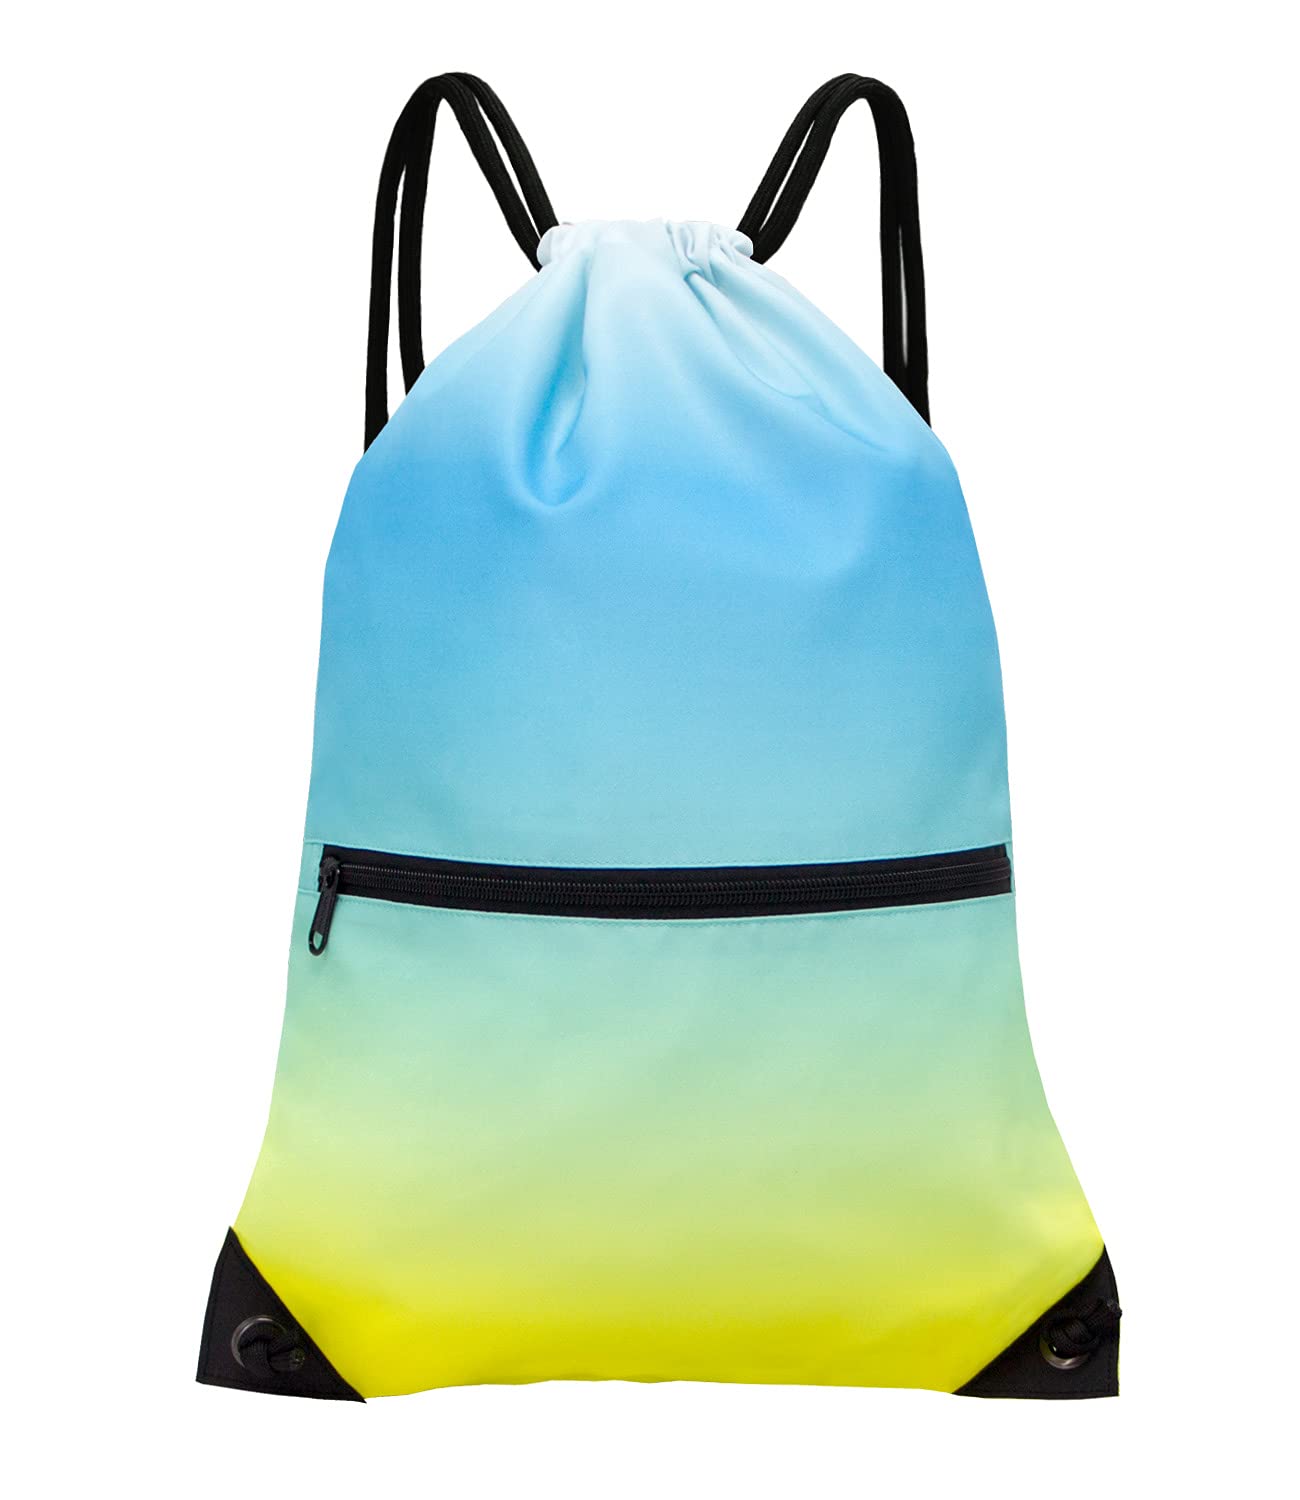 Drawstring Backpack Bag Sport Gym Sackpack Gradient Yellow Blue HLC001